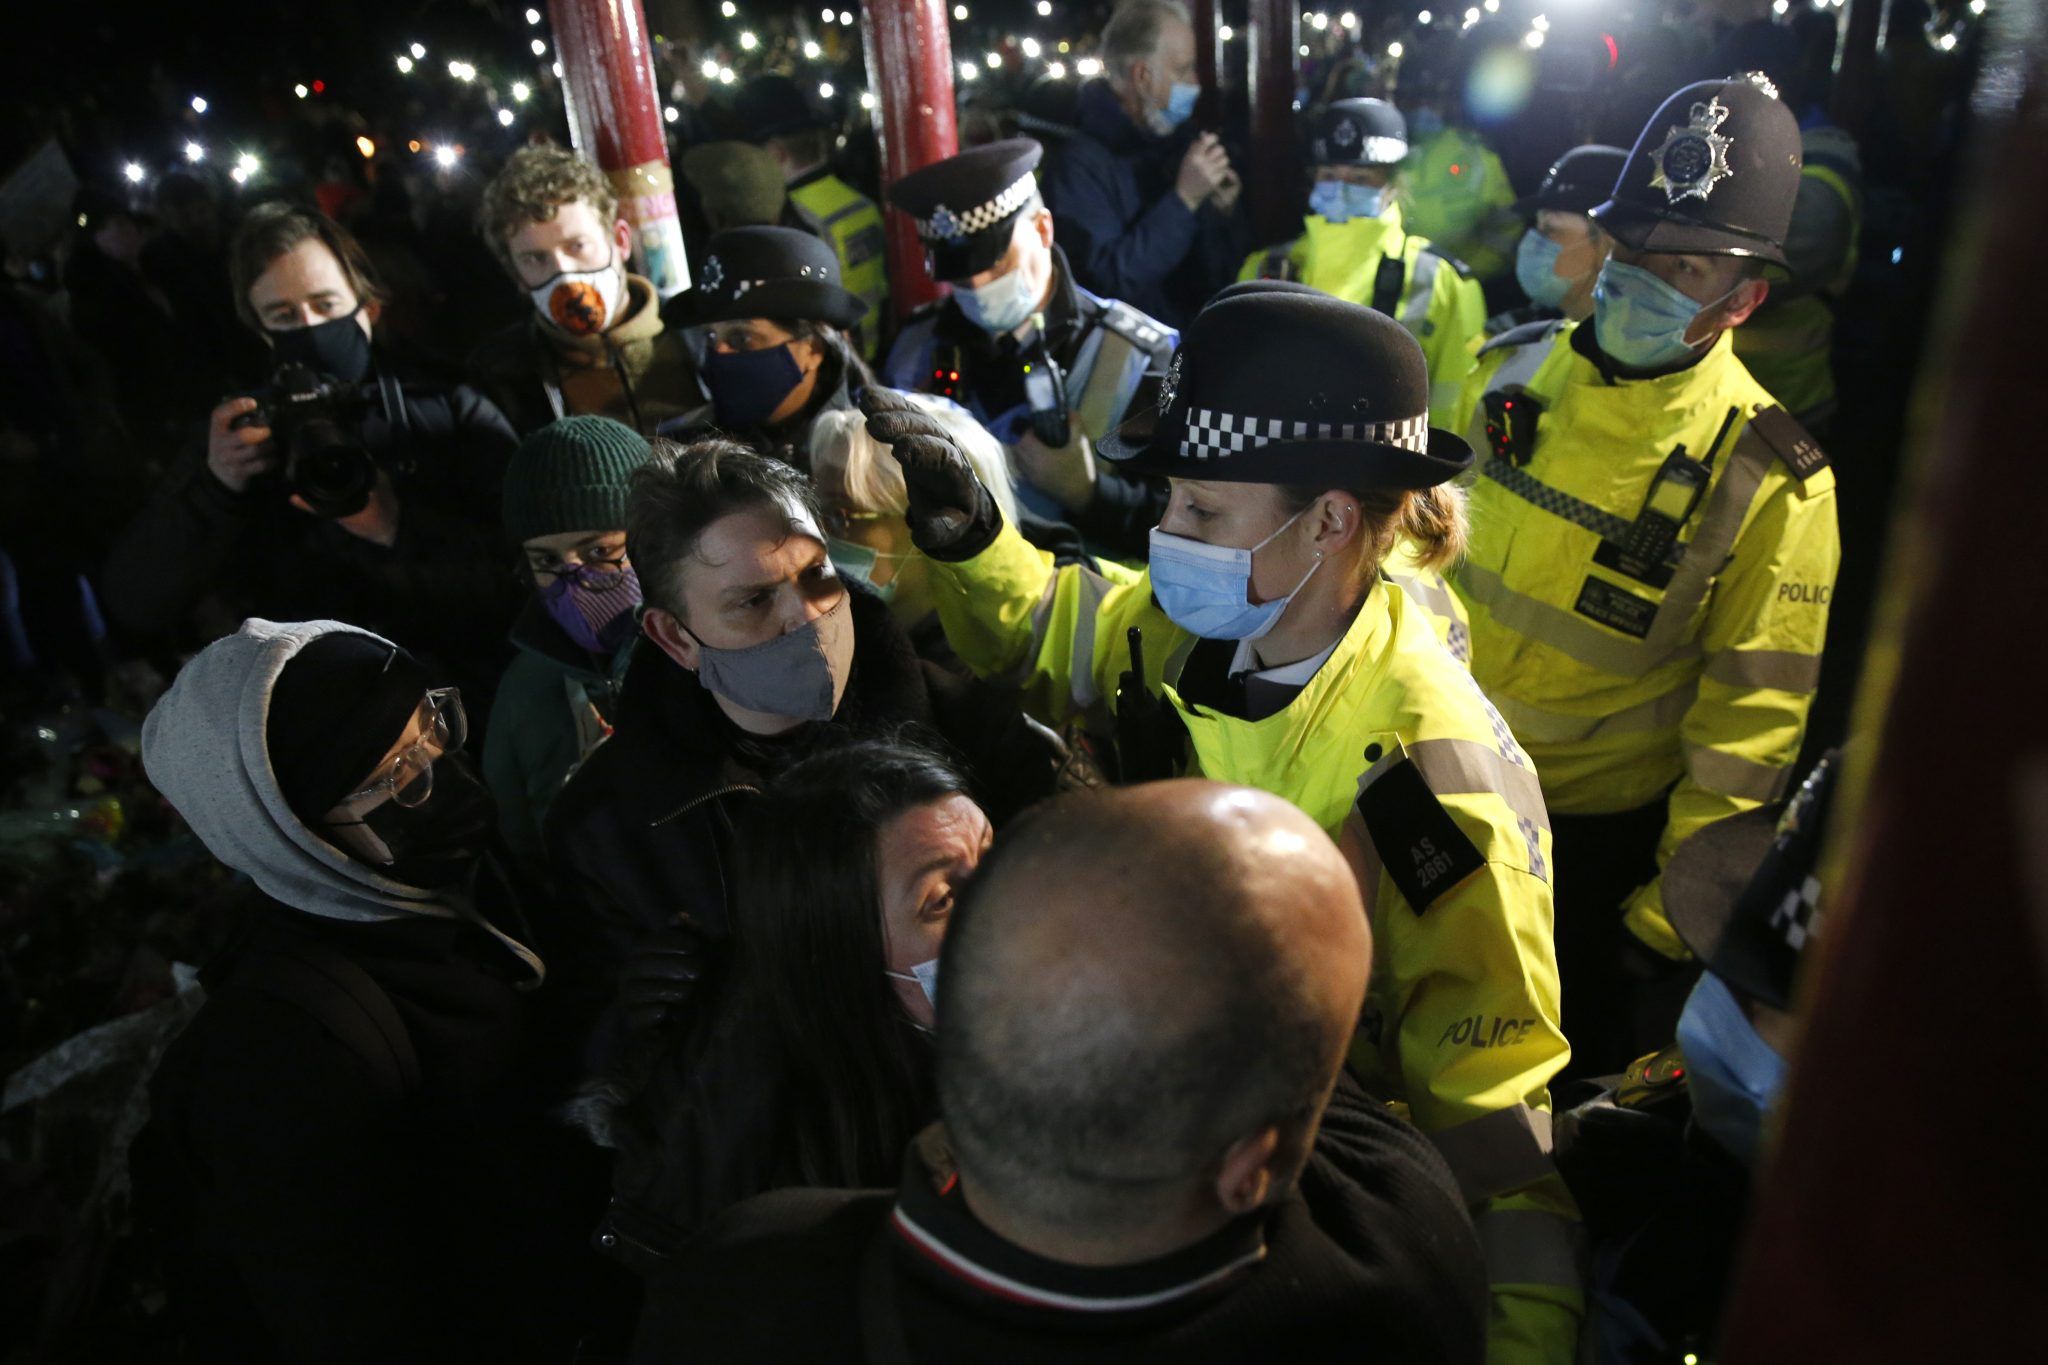 Police clash with mourners at a vigil for Sarah Everard on Clapham Common